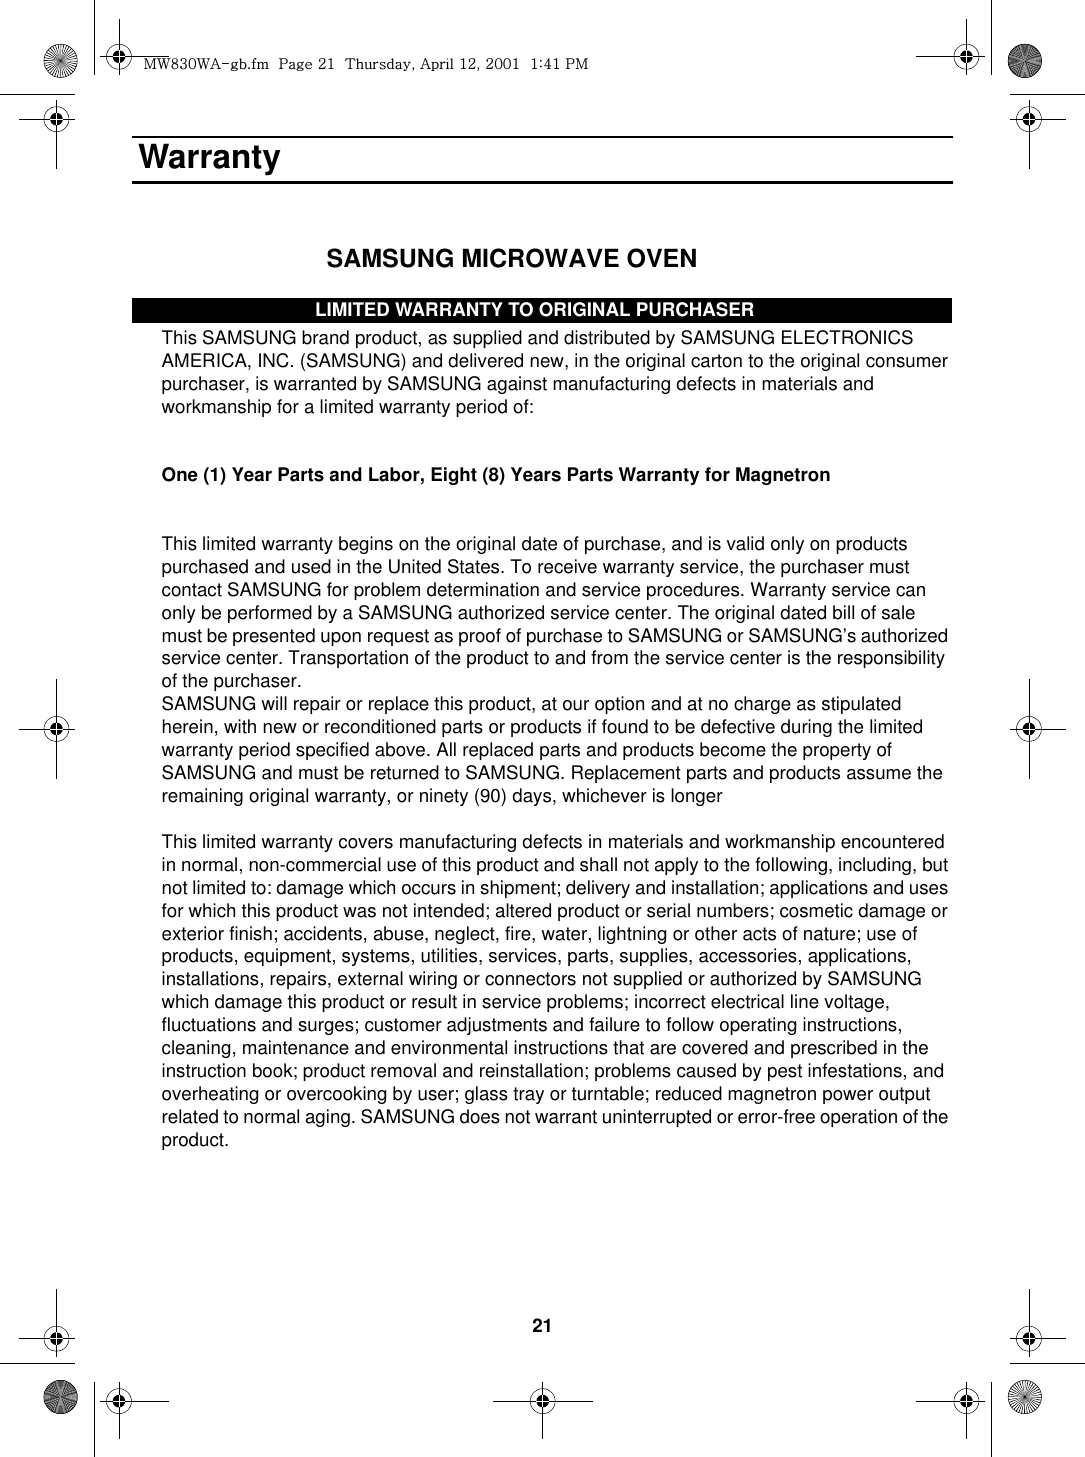 21 Warranty                                                           SAMSUNG MICROWAVE OVENLIMITED WARRANTY TO ORIGINAL PURCHASERThis SAMSUNG brand product, as supplied and distributed by SAMSUNG ELECTRONICS AMERICA, INC. (SAMSUNG) and delivered new, in the original carton to the original consumer purchaser, is warranted by SAMSUNG against manufacturing defects in materials and workmanship for a limited warranty period of:One (1) Year Parts and Labor, Eight (8) Years Parts Warranty for MagnetronThis limited warranty begins on the original date of purchase, and is valid only on products purchased and used in the United States. To receive warranty service, the purchaser must contact SAMSUNG for problem determination and service procedures. Warranty service can only be performed by a SAMSUNG authorized service center. The original dated bill of sale must be presented upon request as proof of purchase to SAMSUNG or SAMSUNG’s authorized service center. Transportation of the product to and from the service center is the responsibility of the purchaser.SAMSUNG will repair or replace this product, at our option and at no charge as stipulated herein, with new or reconditioned parts or products if found to be defective during the limited warranty period specified above. All replaced parts and products become the property of SAMSUNG and must be returned to SAMSUNG. Replacement parts and products assume the remaining original warranty, or ninety (90) days, whichever is longerThis limited warranty covers manufacturing defects in materials and workmanship encountered in normal, non-commercial use of this product and shall not apply to the following, including, but not limited to: damage which occurs in shipment; delivery and installation; applications and uses for which this product was not intended; altered product or serial numbers; cosmetic damage or exterior finish; accidents, abuse, neglect, fire, water, lightning or other acts of nature; use of products, equipment, systems, utilities, services, parts, supplies, accessories, applications, installations, repairs, external wiring or connectors not supplied or authorized by SAMSUNG which damage this product or result in service problems; incorrect electrical line voltage, fluctuations and surges; customer adjustments and failure to follow operating instructions, cleaning, maintenance and environmental instructions that are covered and prescribed in the instruction book; product removal and reinstallation; problems caused by pest infestations, and overheating or overcooking by user; glass tray or turntable; reduced magnetron power output related to normal aging. SAMSUNG does not warrant uninterrupted or error-free operation of the product.     LIMITED WARRANTY TO ORIGINAL PURCHASERt~_ZW~hTUGGwGYXGG{SGhGXYSGYWWXGGXa[XGwt